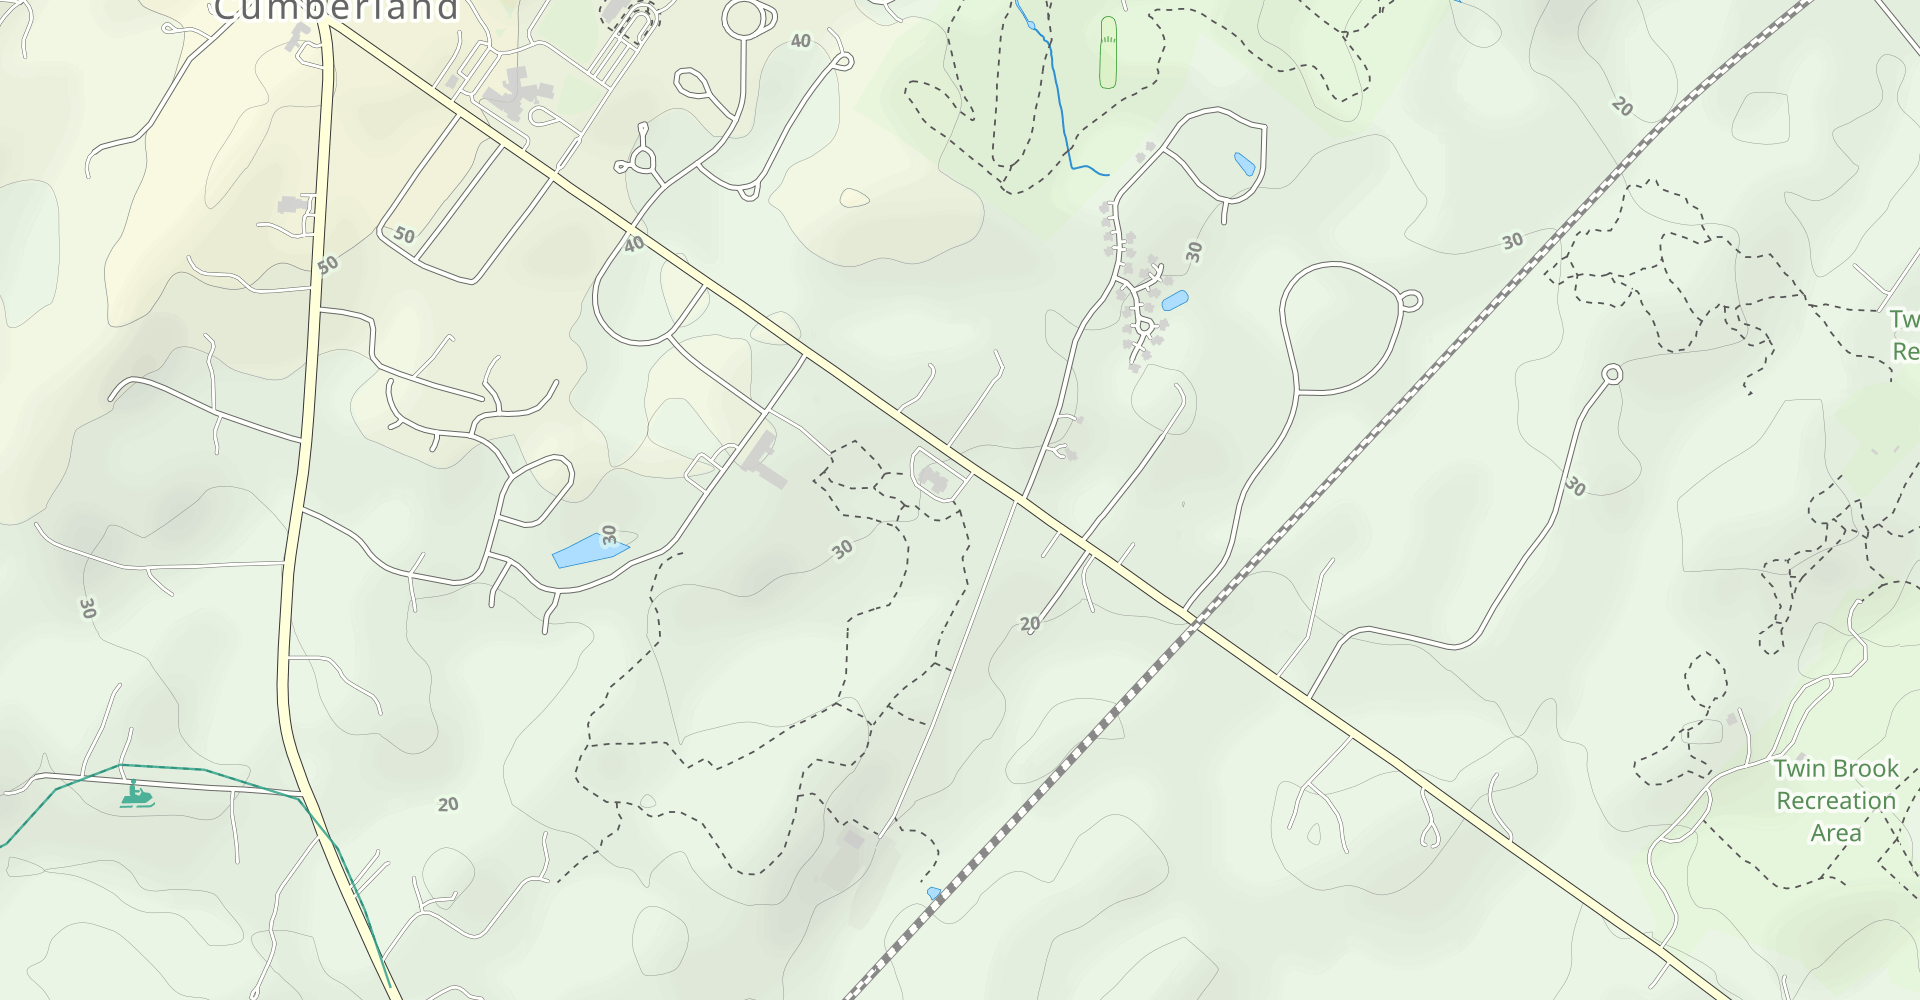 Cumberland Town Forest